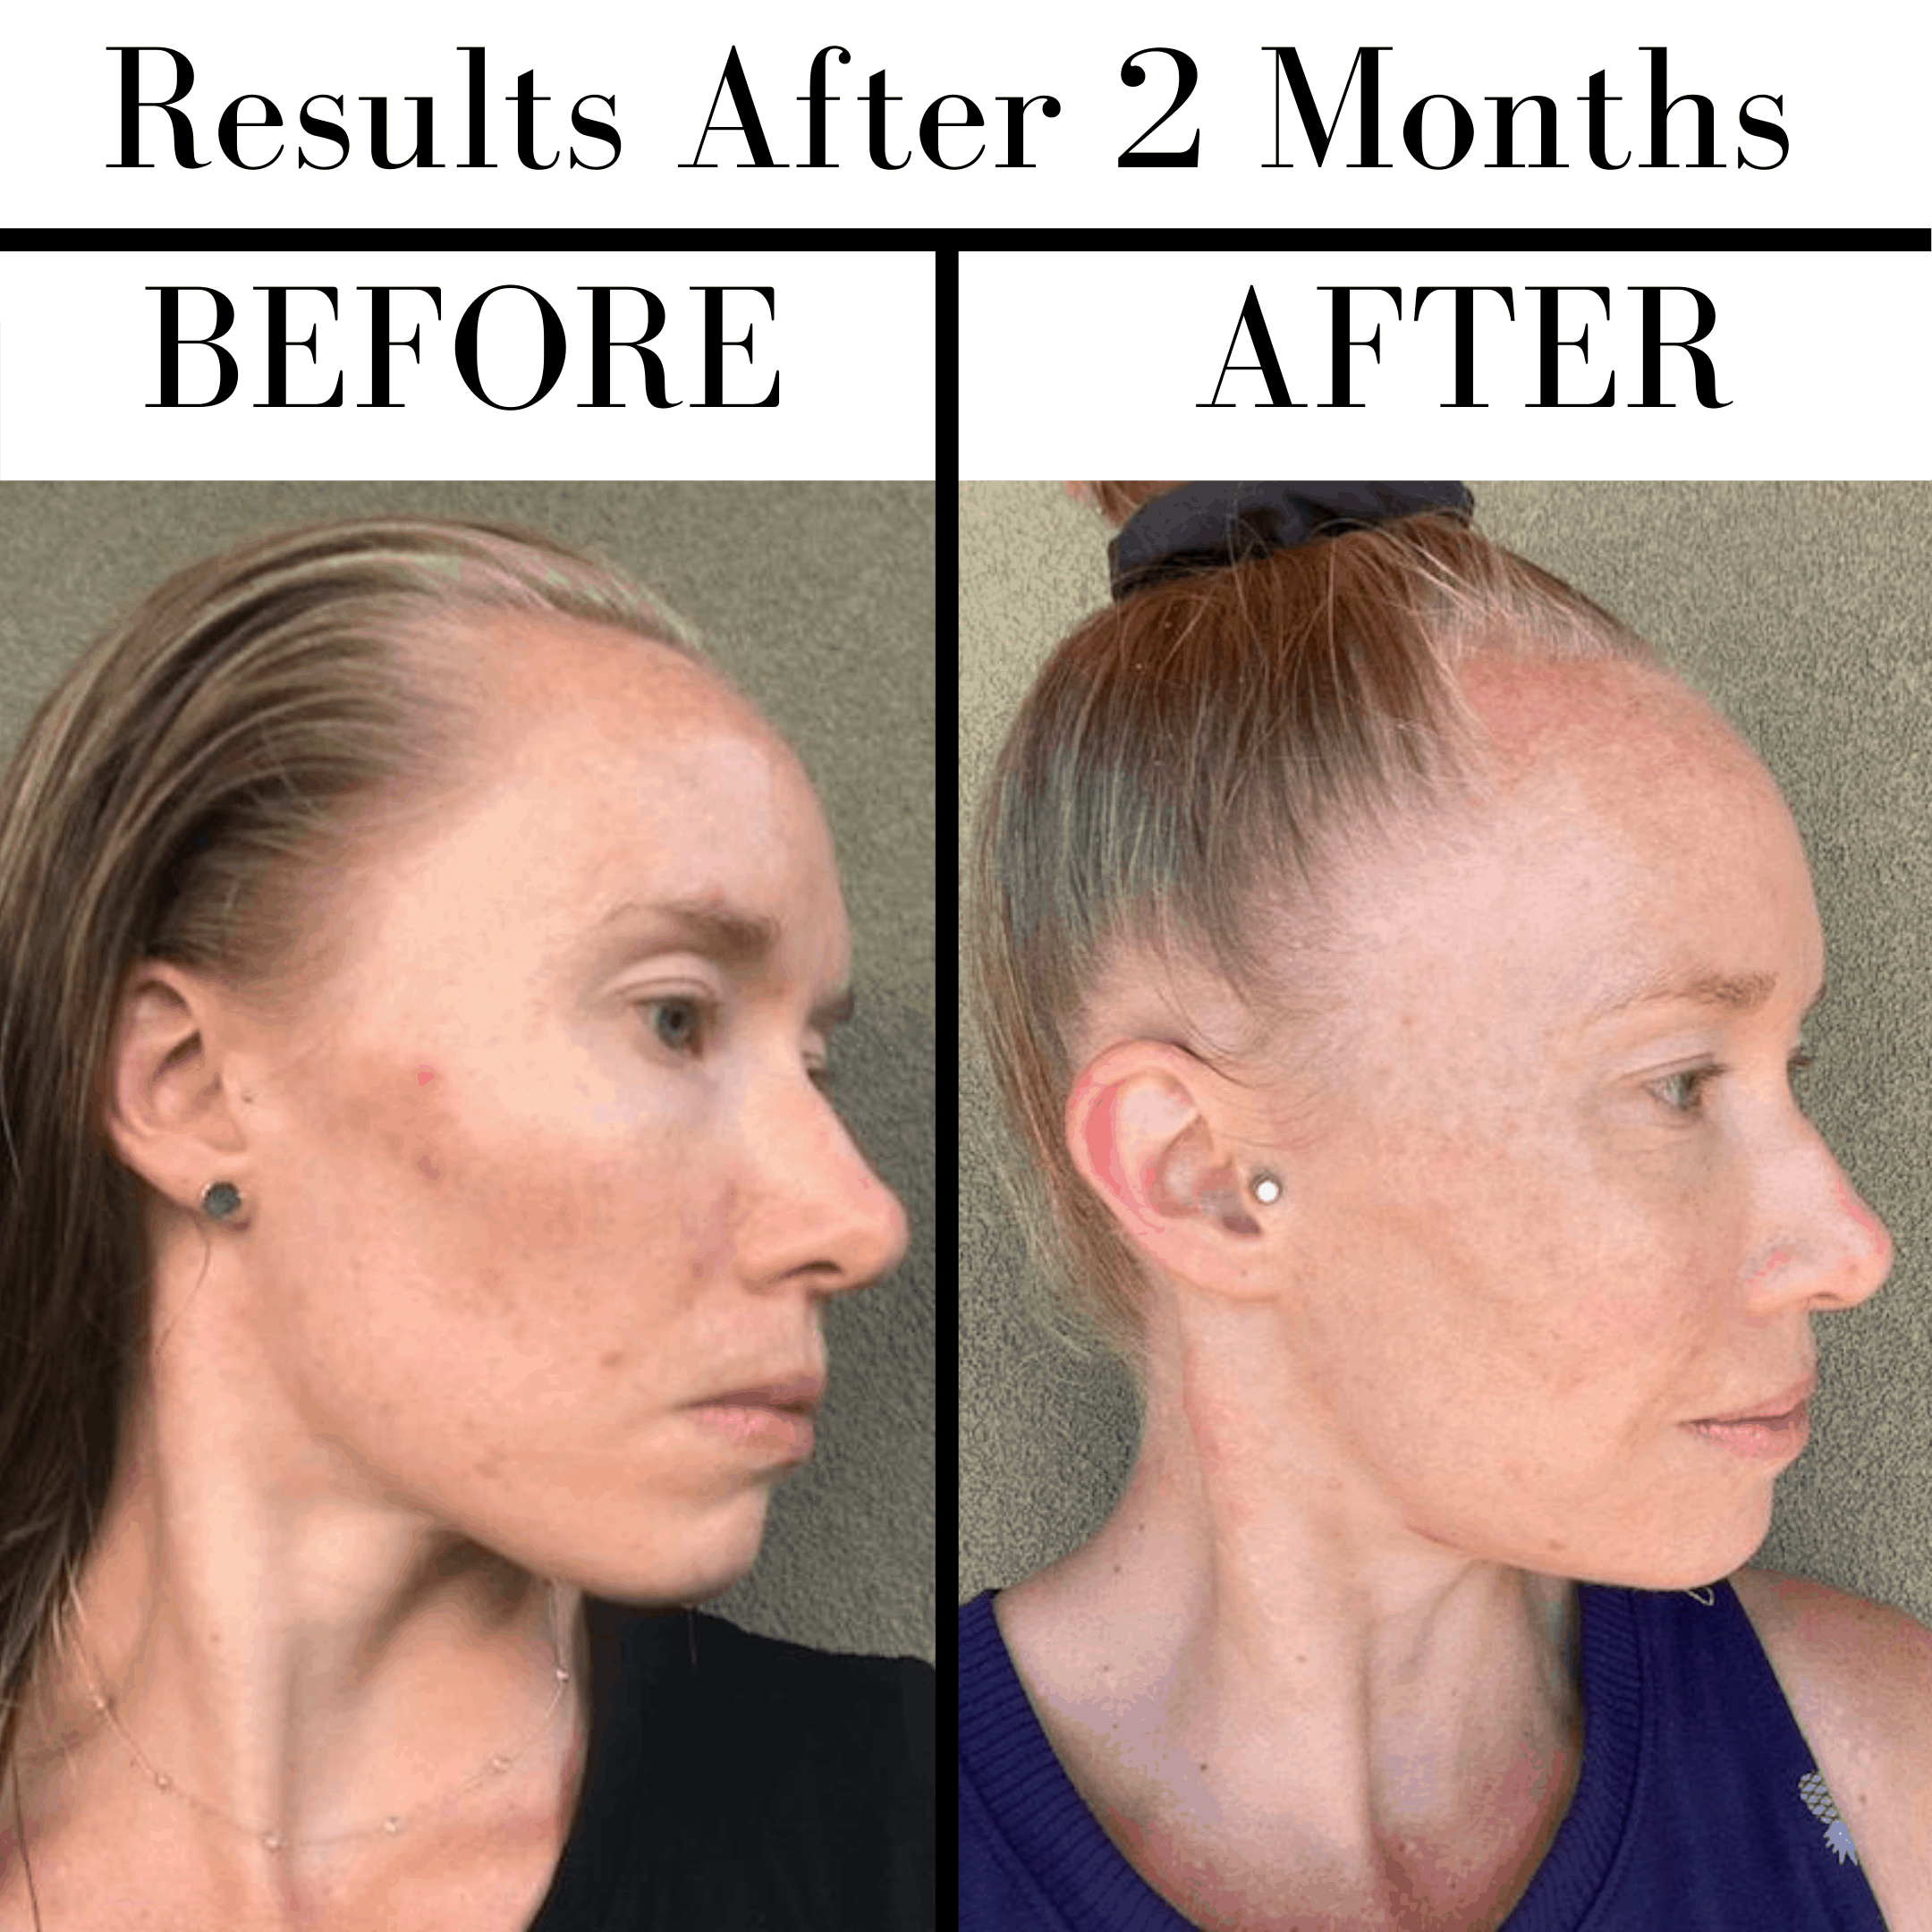 Before and after photos from using the Beautycounter Vitamin C Serum.